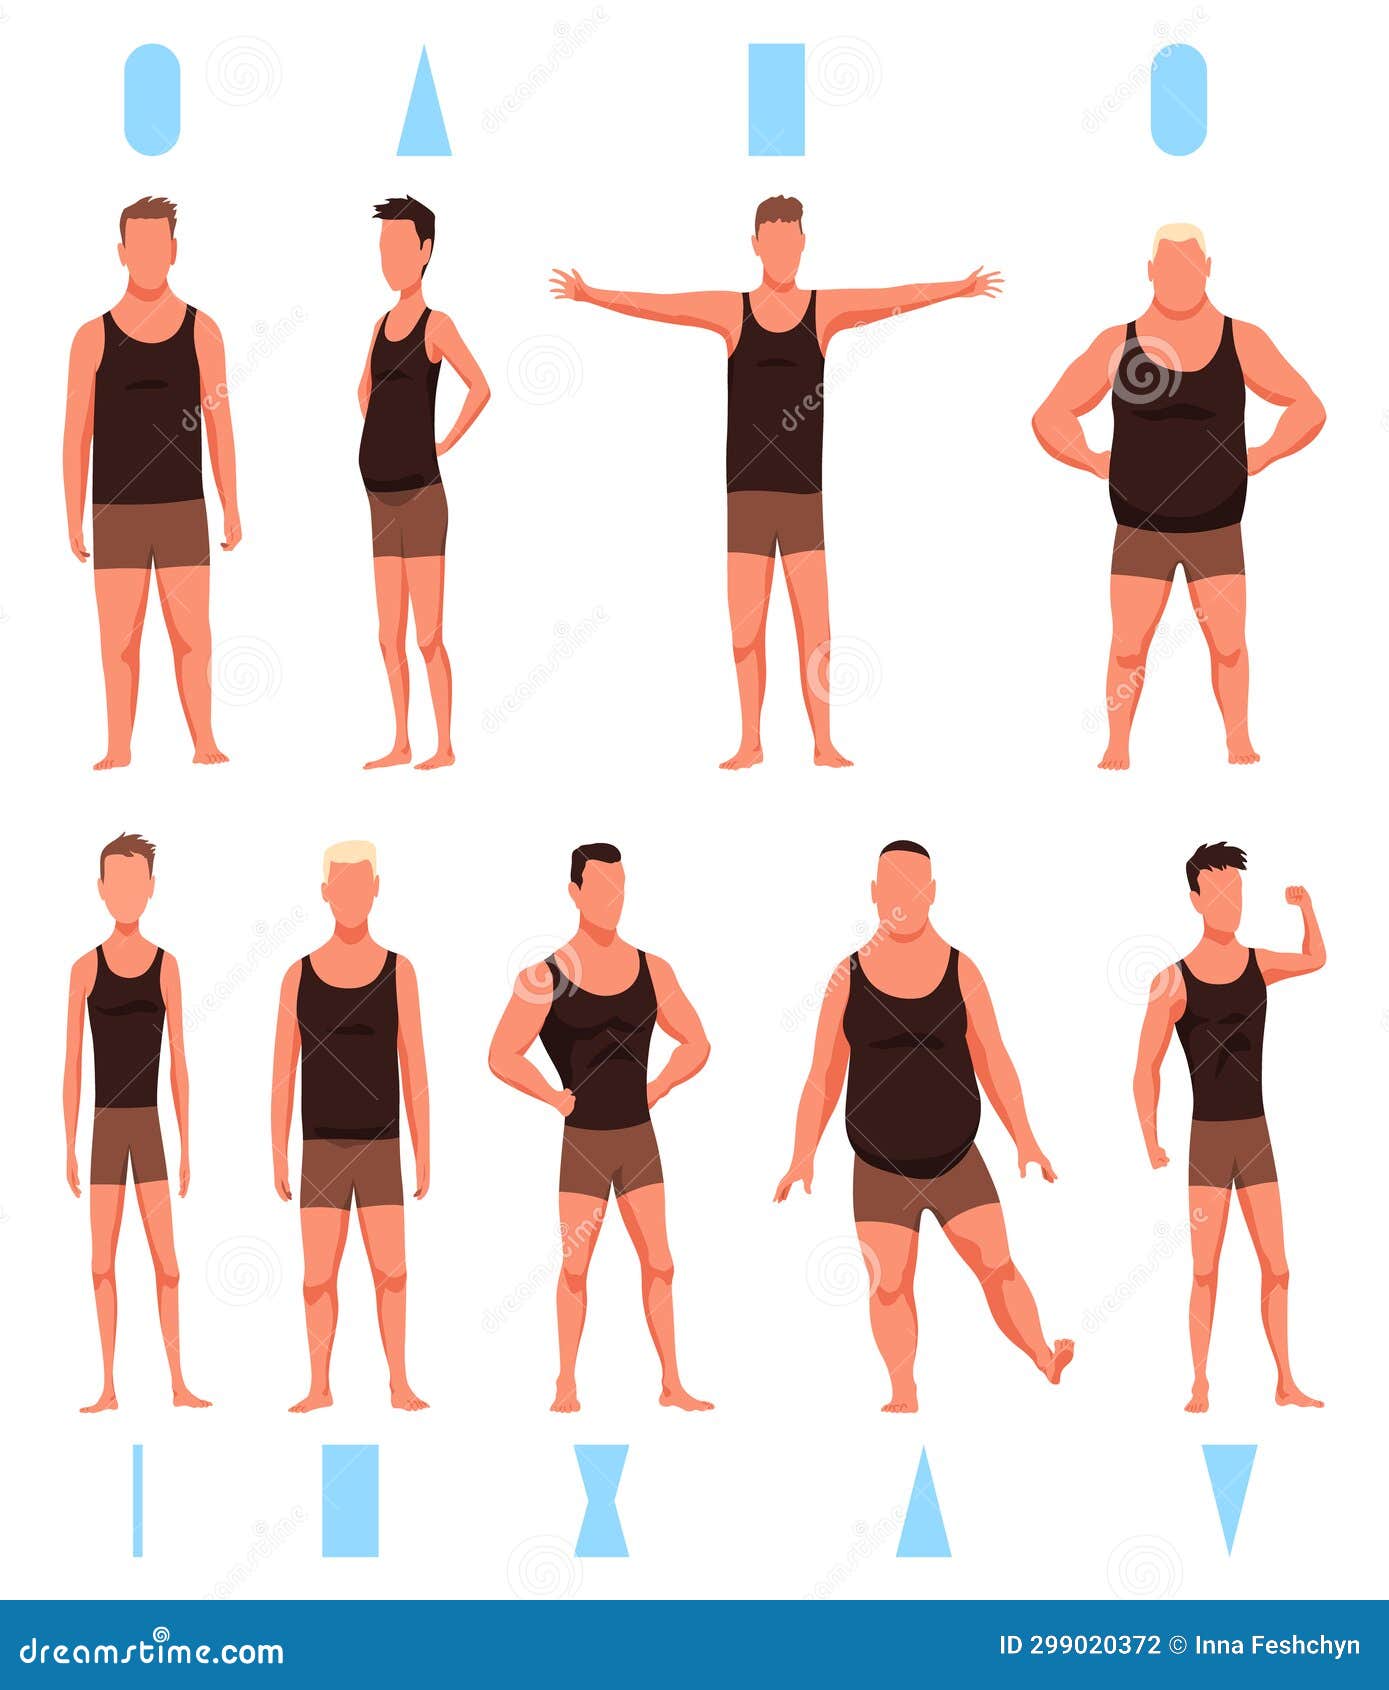 Human body shapes male figures types set Vector Image